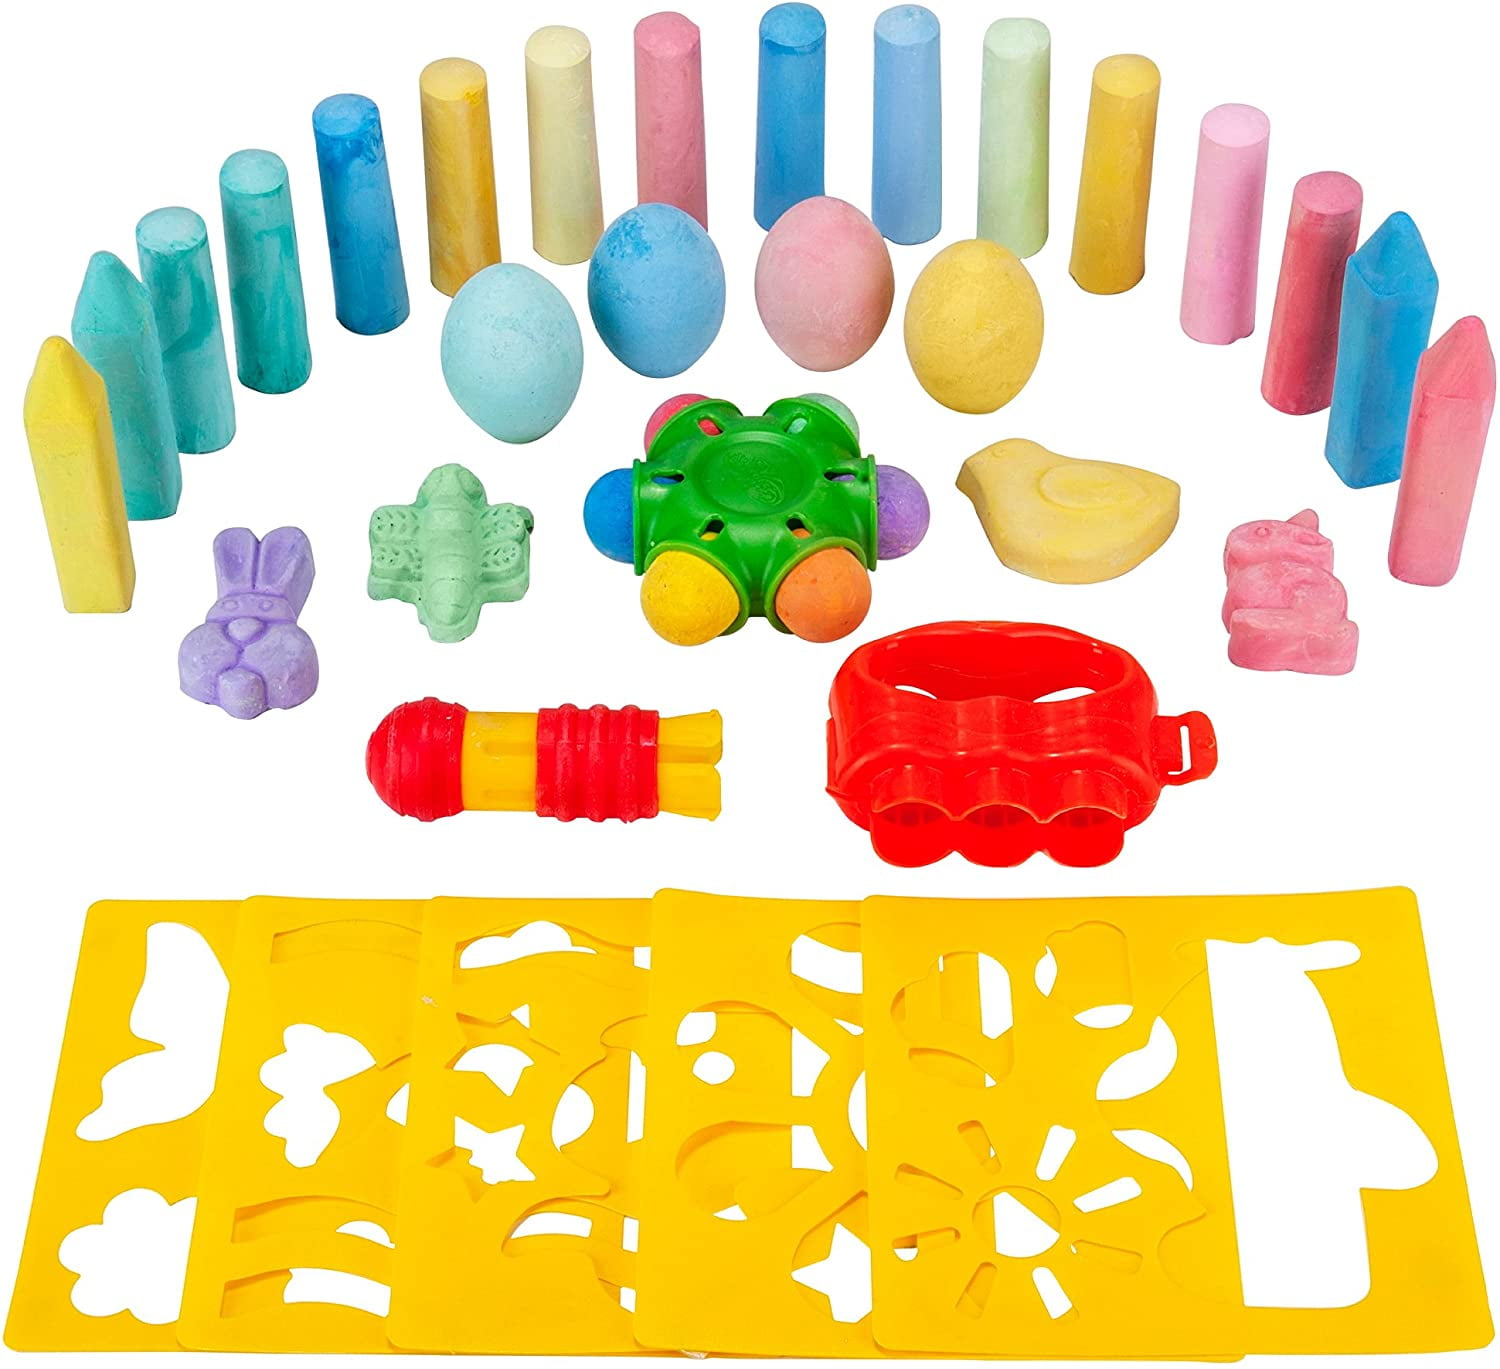 ZHBDMGK Sidewalk Chalk Set with Holder for Kids, 12Pcs Dust-free Washable  Toddler Chalk in 12 Colors for Blackboard Drawing Writing Toys Gift Party